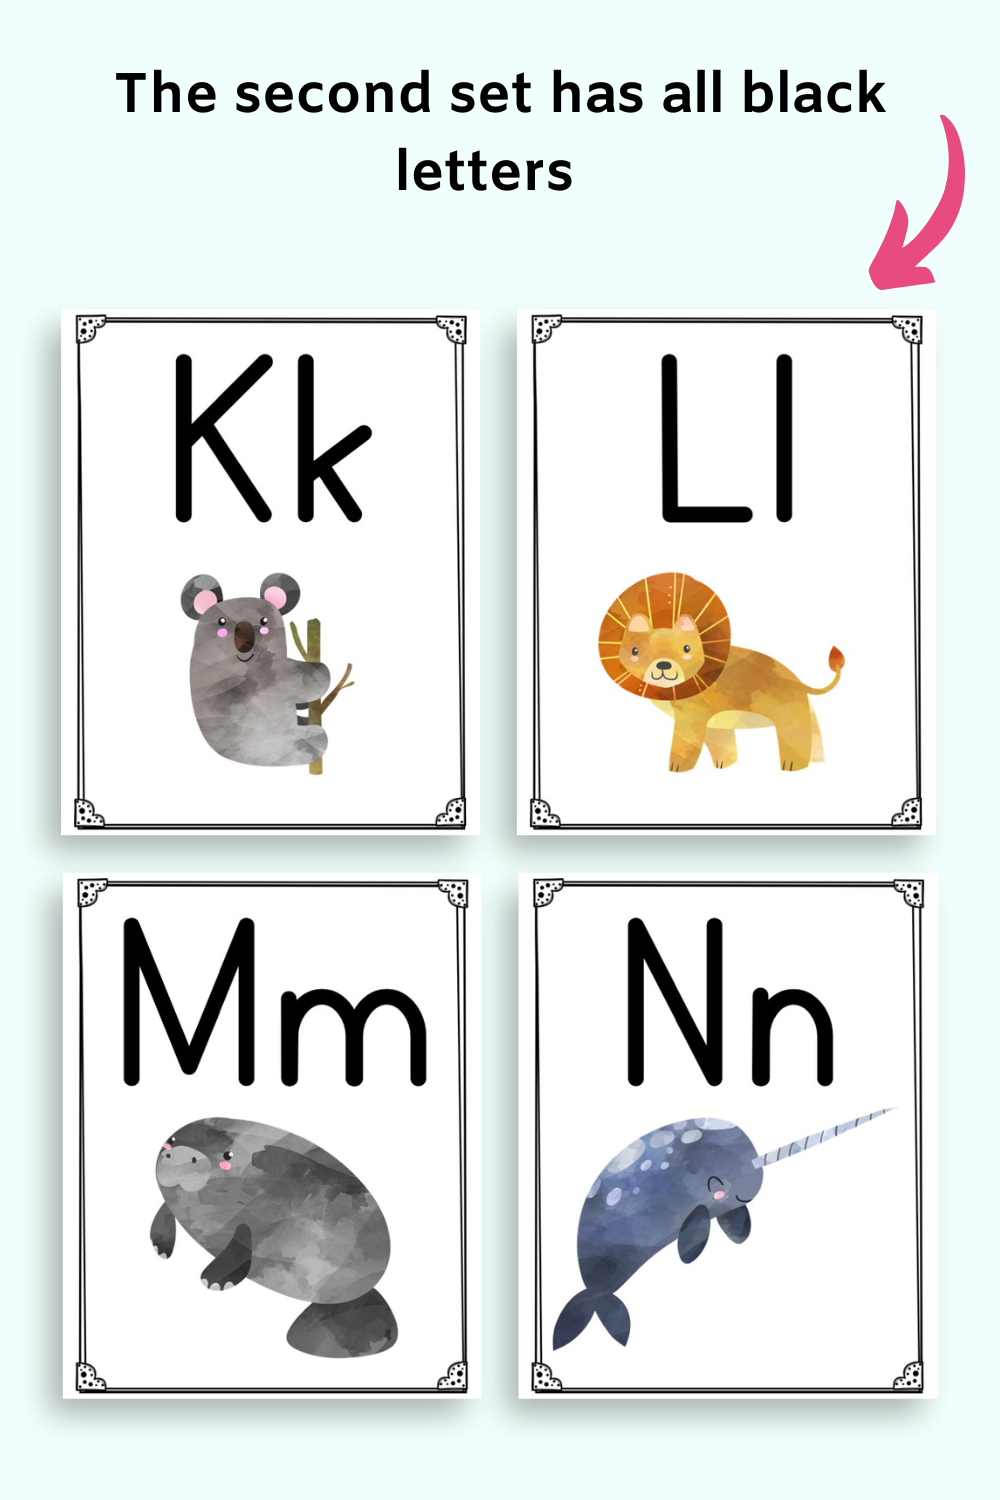 Text "the second set has all black letters" with four alphabet posters - K, L, M , and N